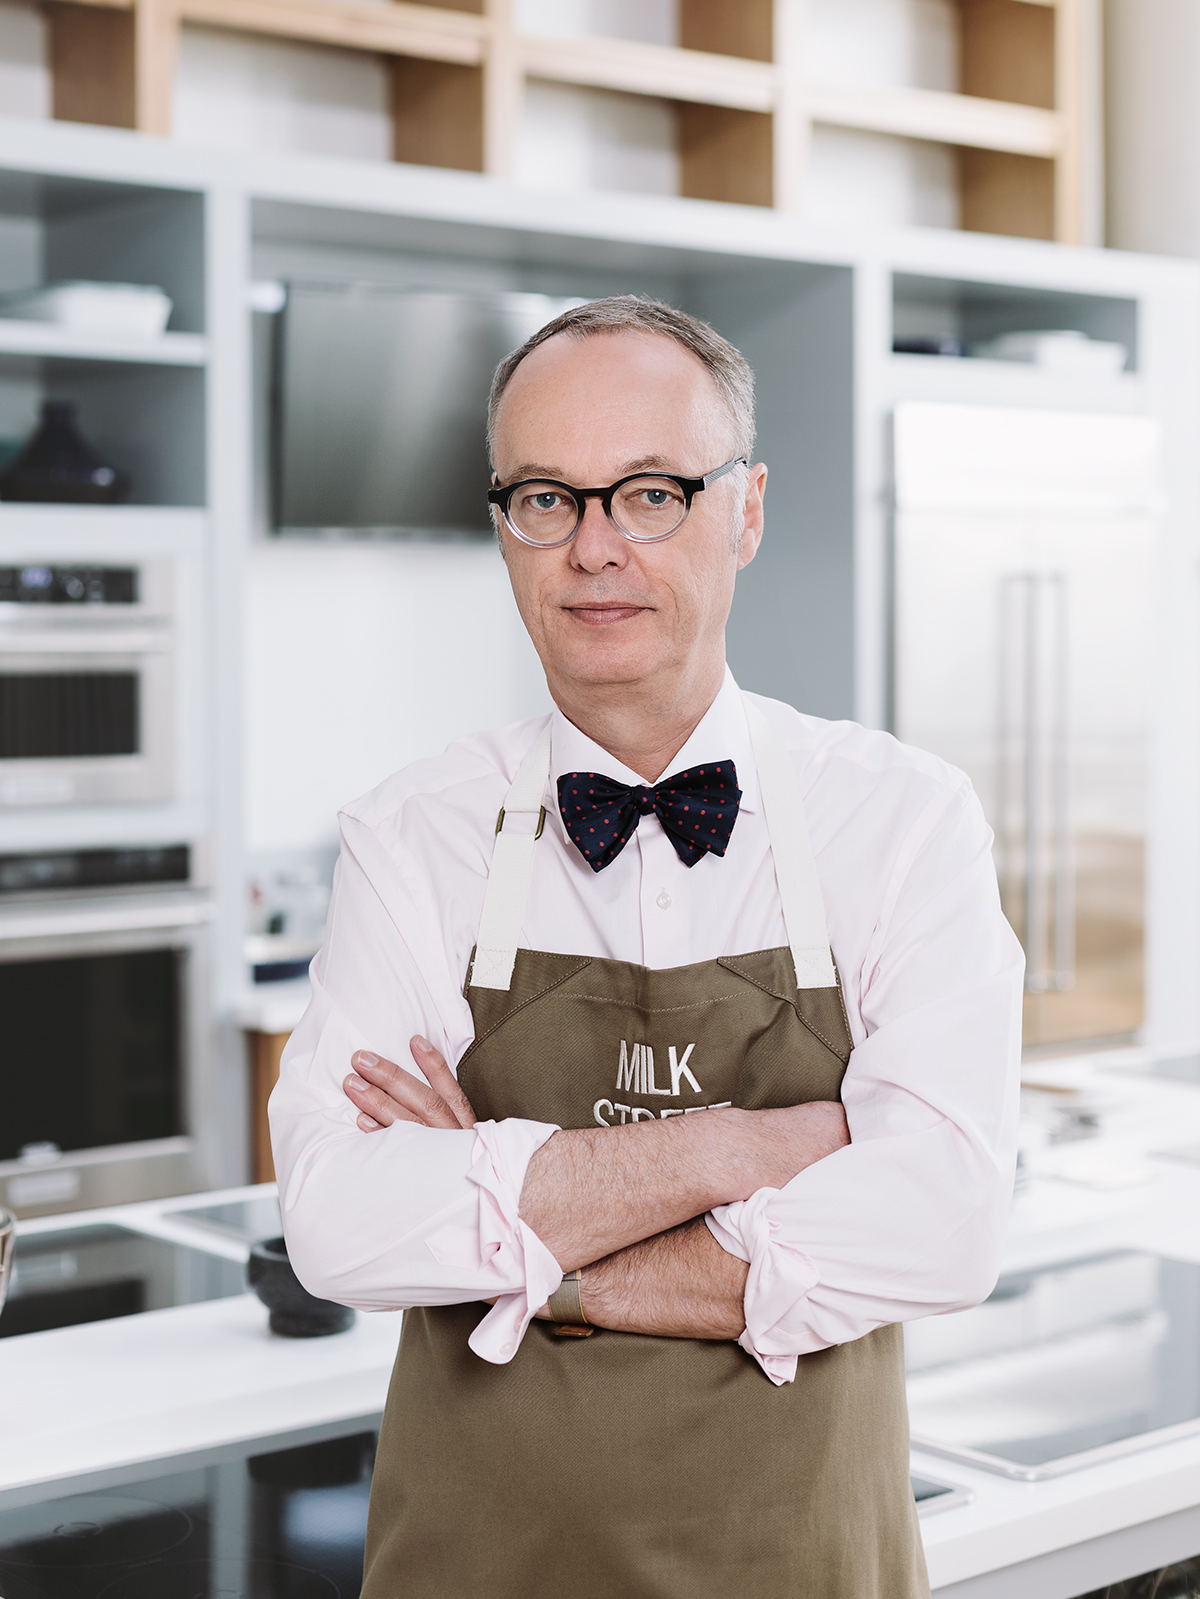 The Best Tahini and How To Use It  Christopher Kimball's Milk Street